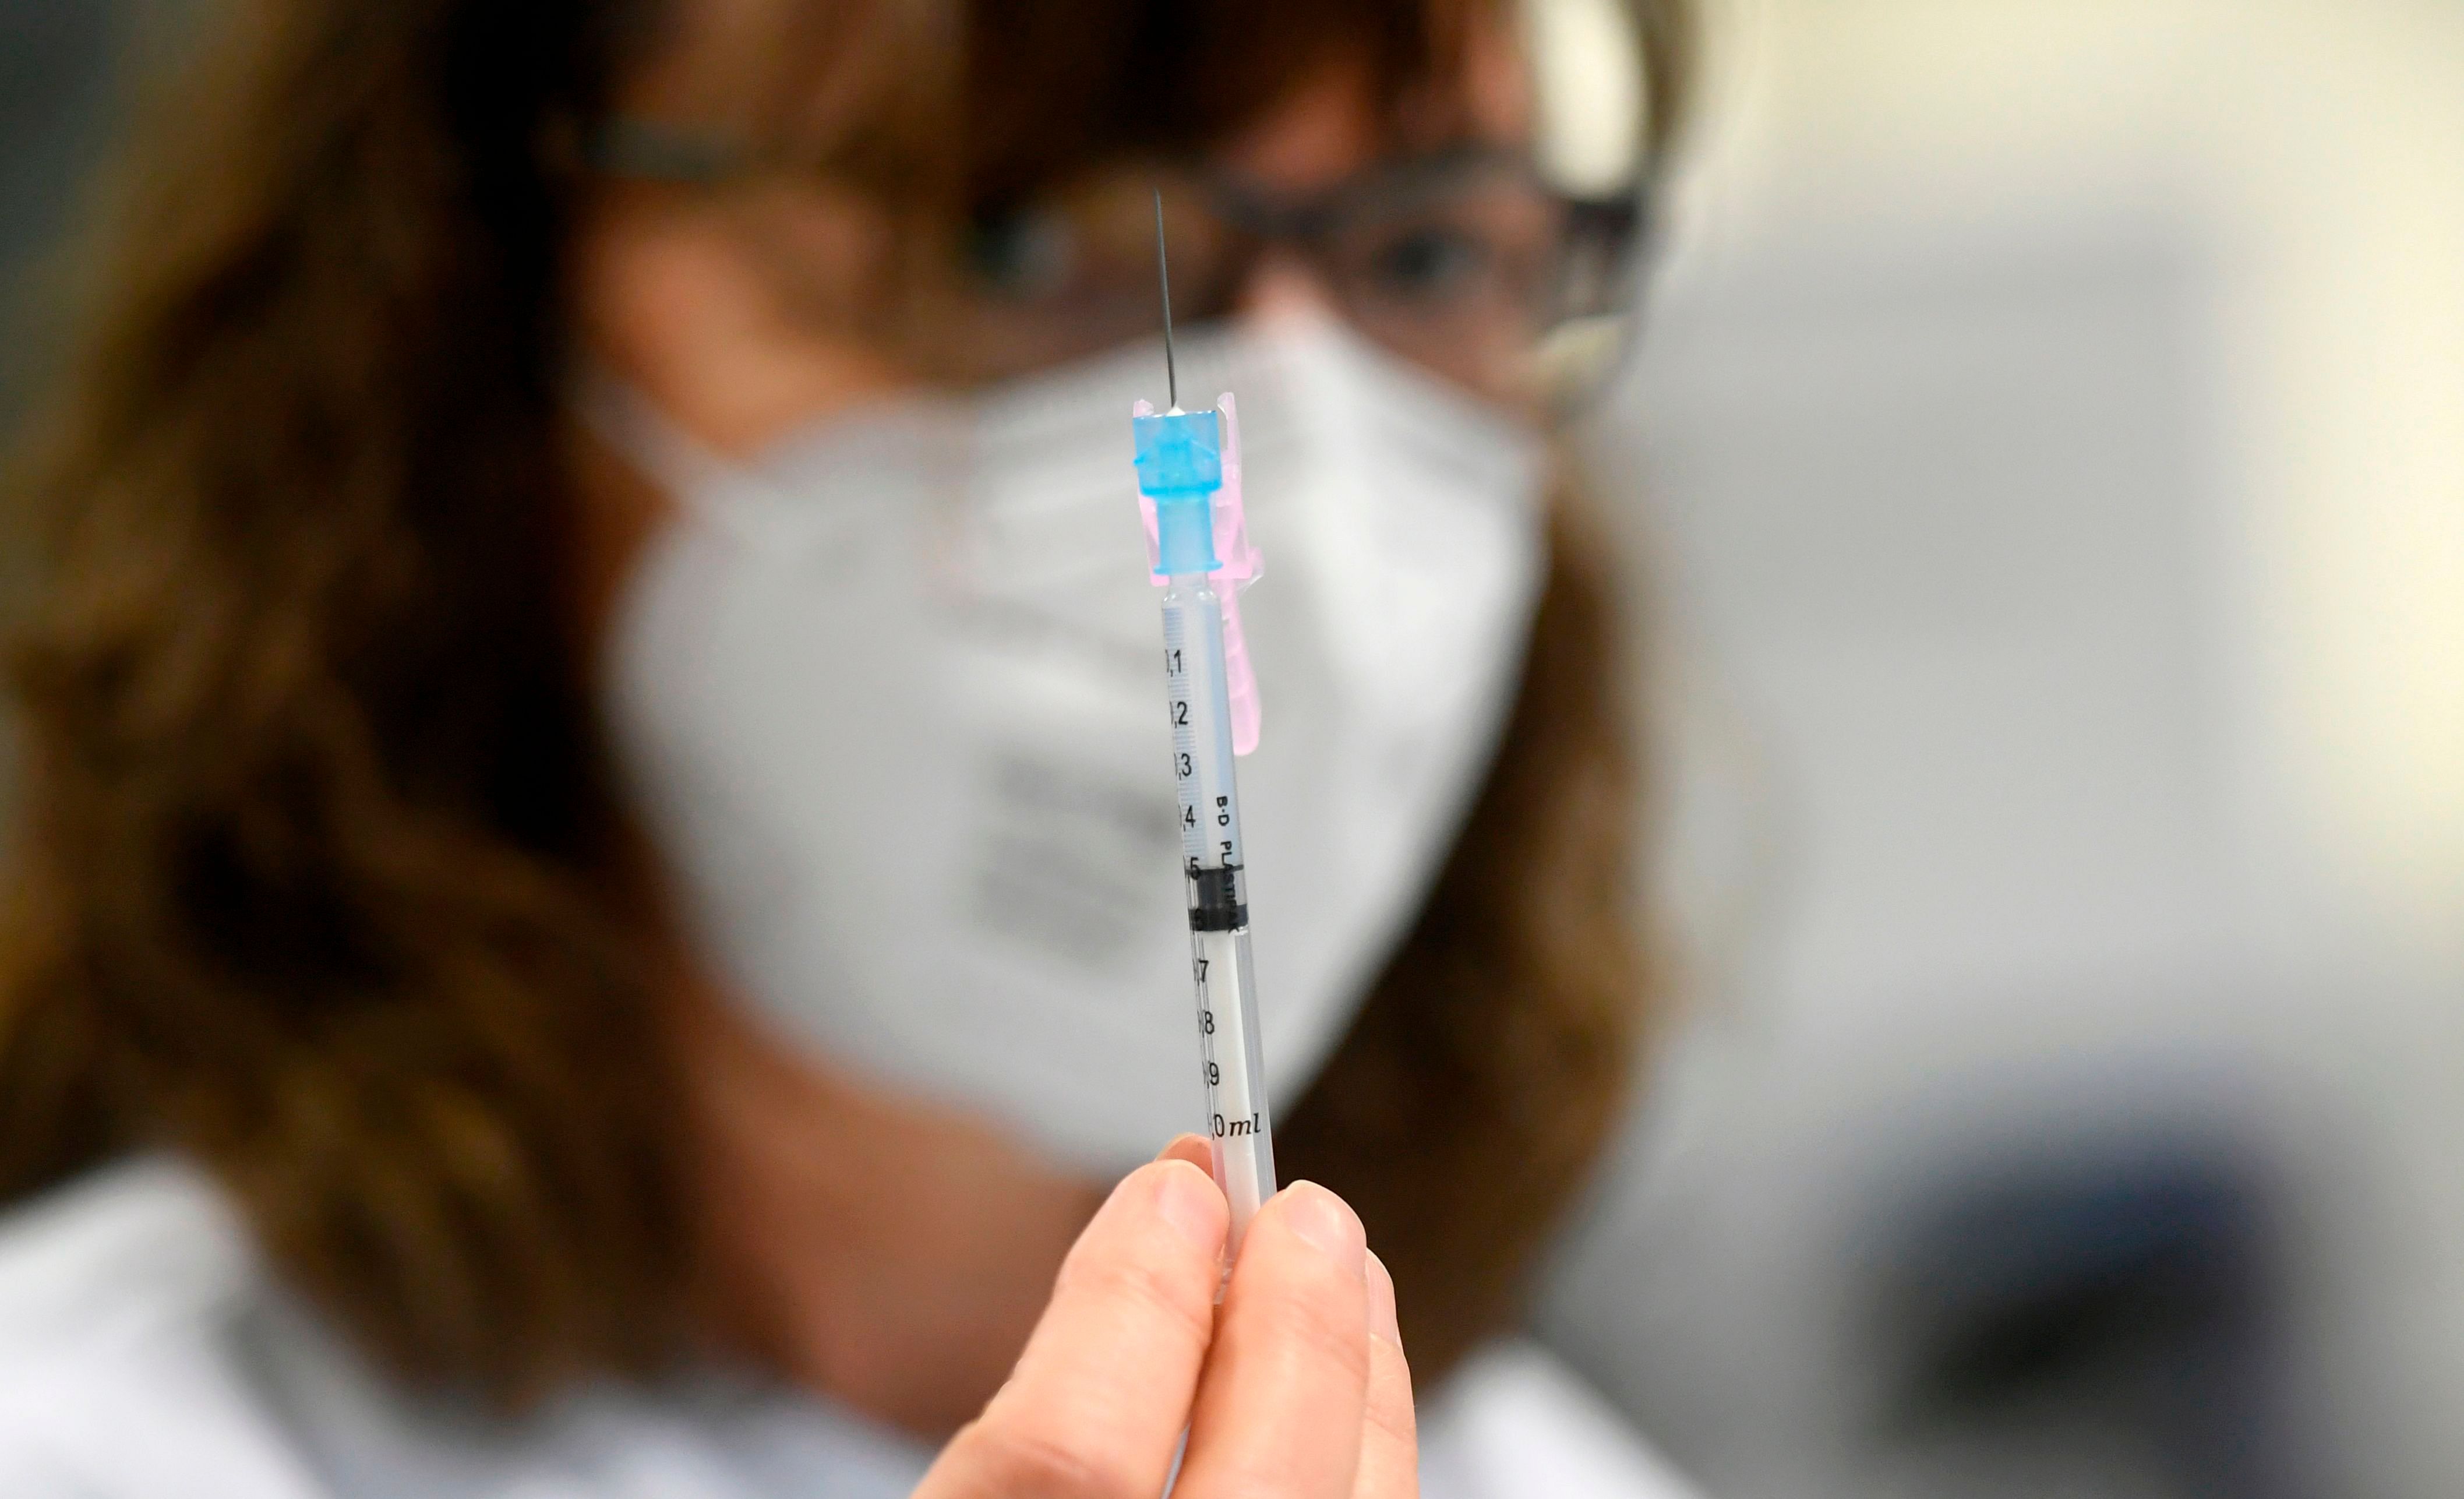 An employee presents an injection with the Moderna Covid-19 vaccine at the corona vaccination centre at the University hospital in Essen, western Germany, on January 18, 2021. - The European Union began a vaccine rollout, even as countries in the bloc were forced back into lockdown by a new strain of the virus, believed to be more infectious, that continues to spread from Britain. The pandemic has claimed more than 1.7 million lives and is still running rampant in much of the world, but the recent launching of innoculation campaigns has boosted hopes that 2021 could bring a respite. Credit: AFP